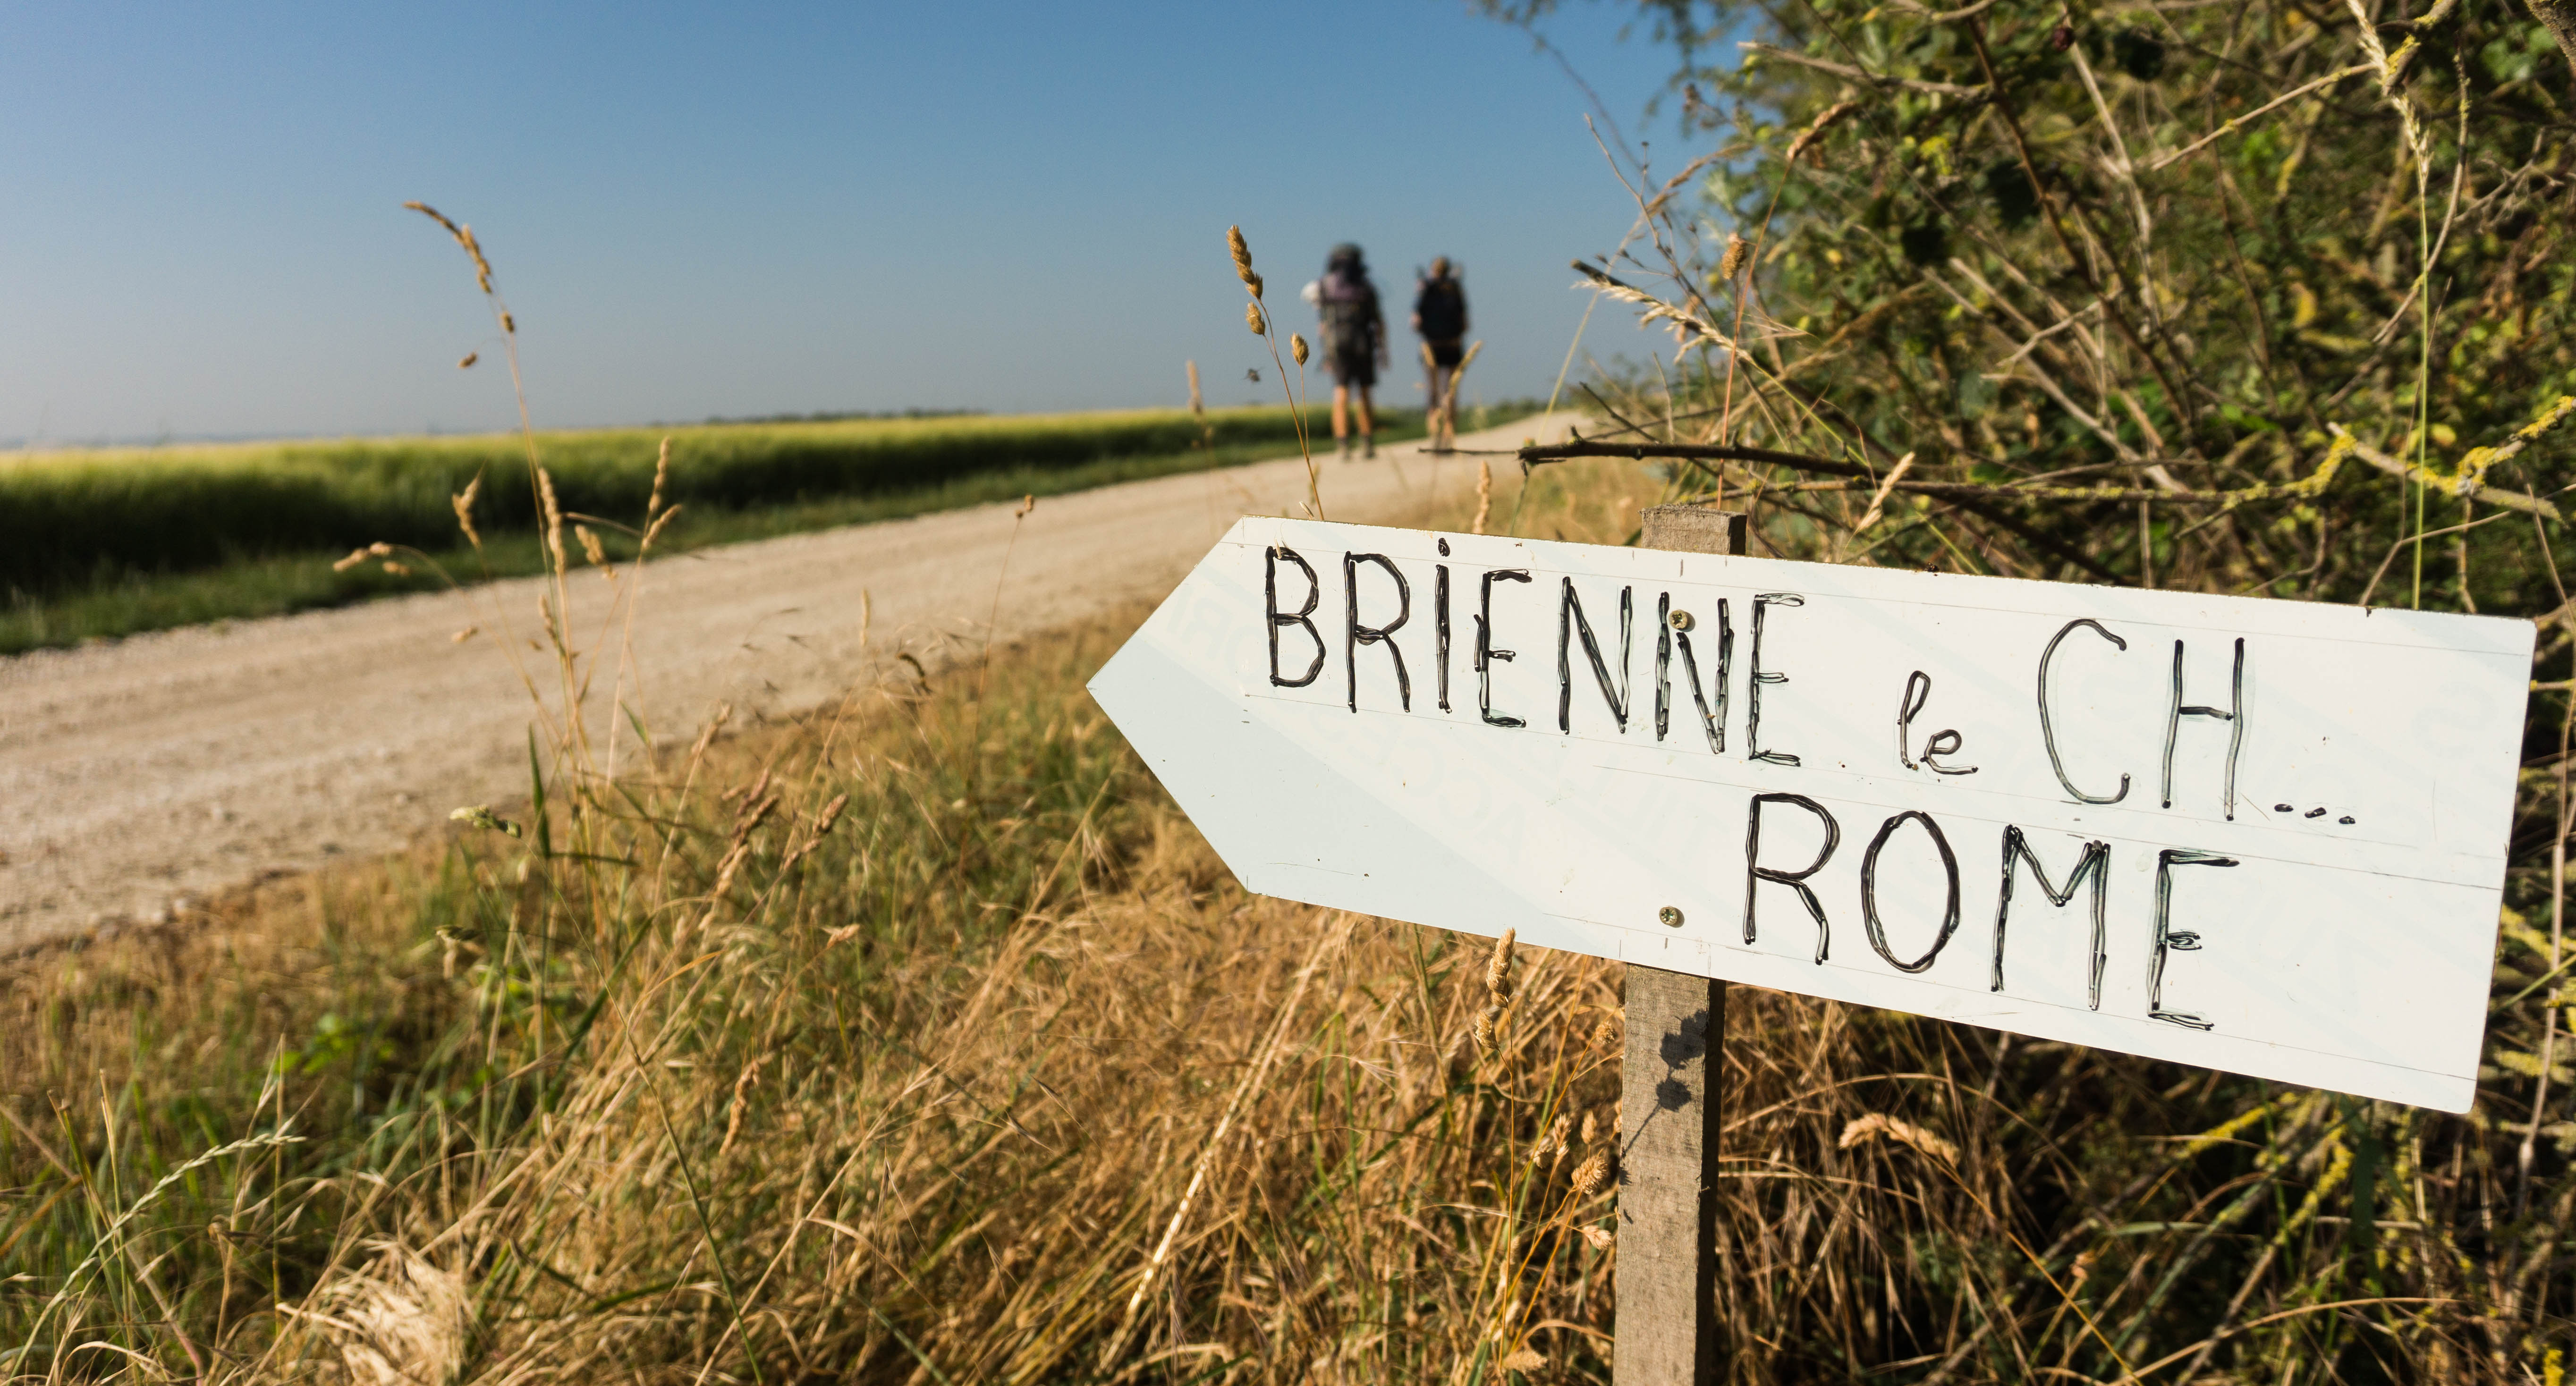 One month of walking past signposts, including to Rome on the Via Francigena